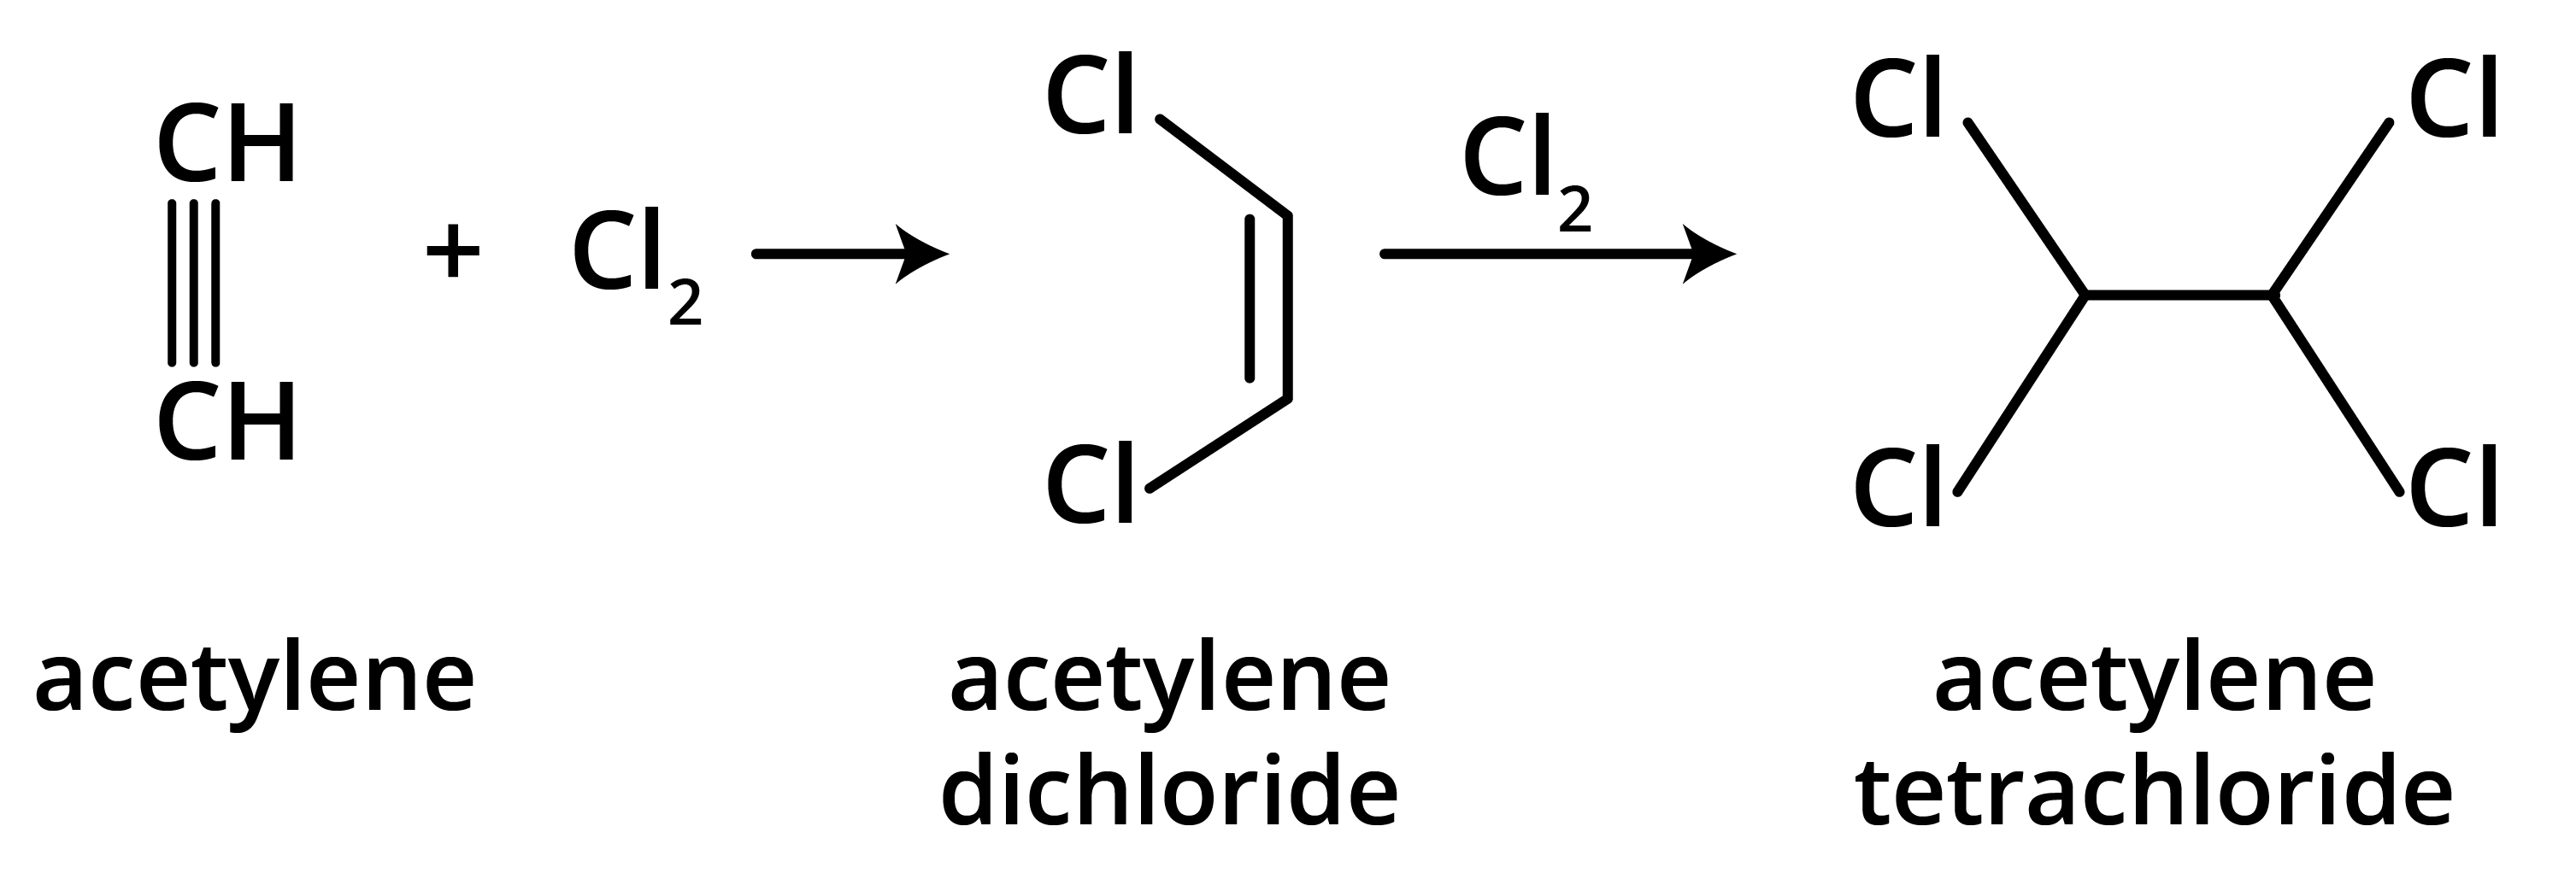 Electrophilic Addition of Chlorine in Alkyne